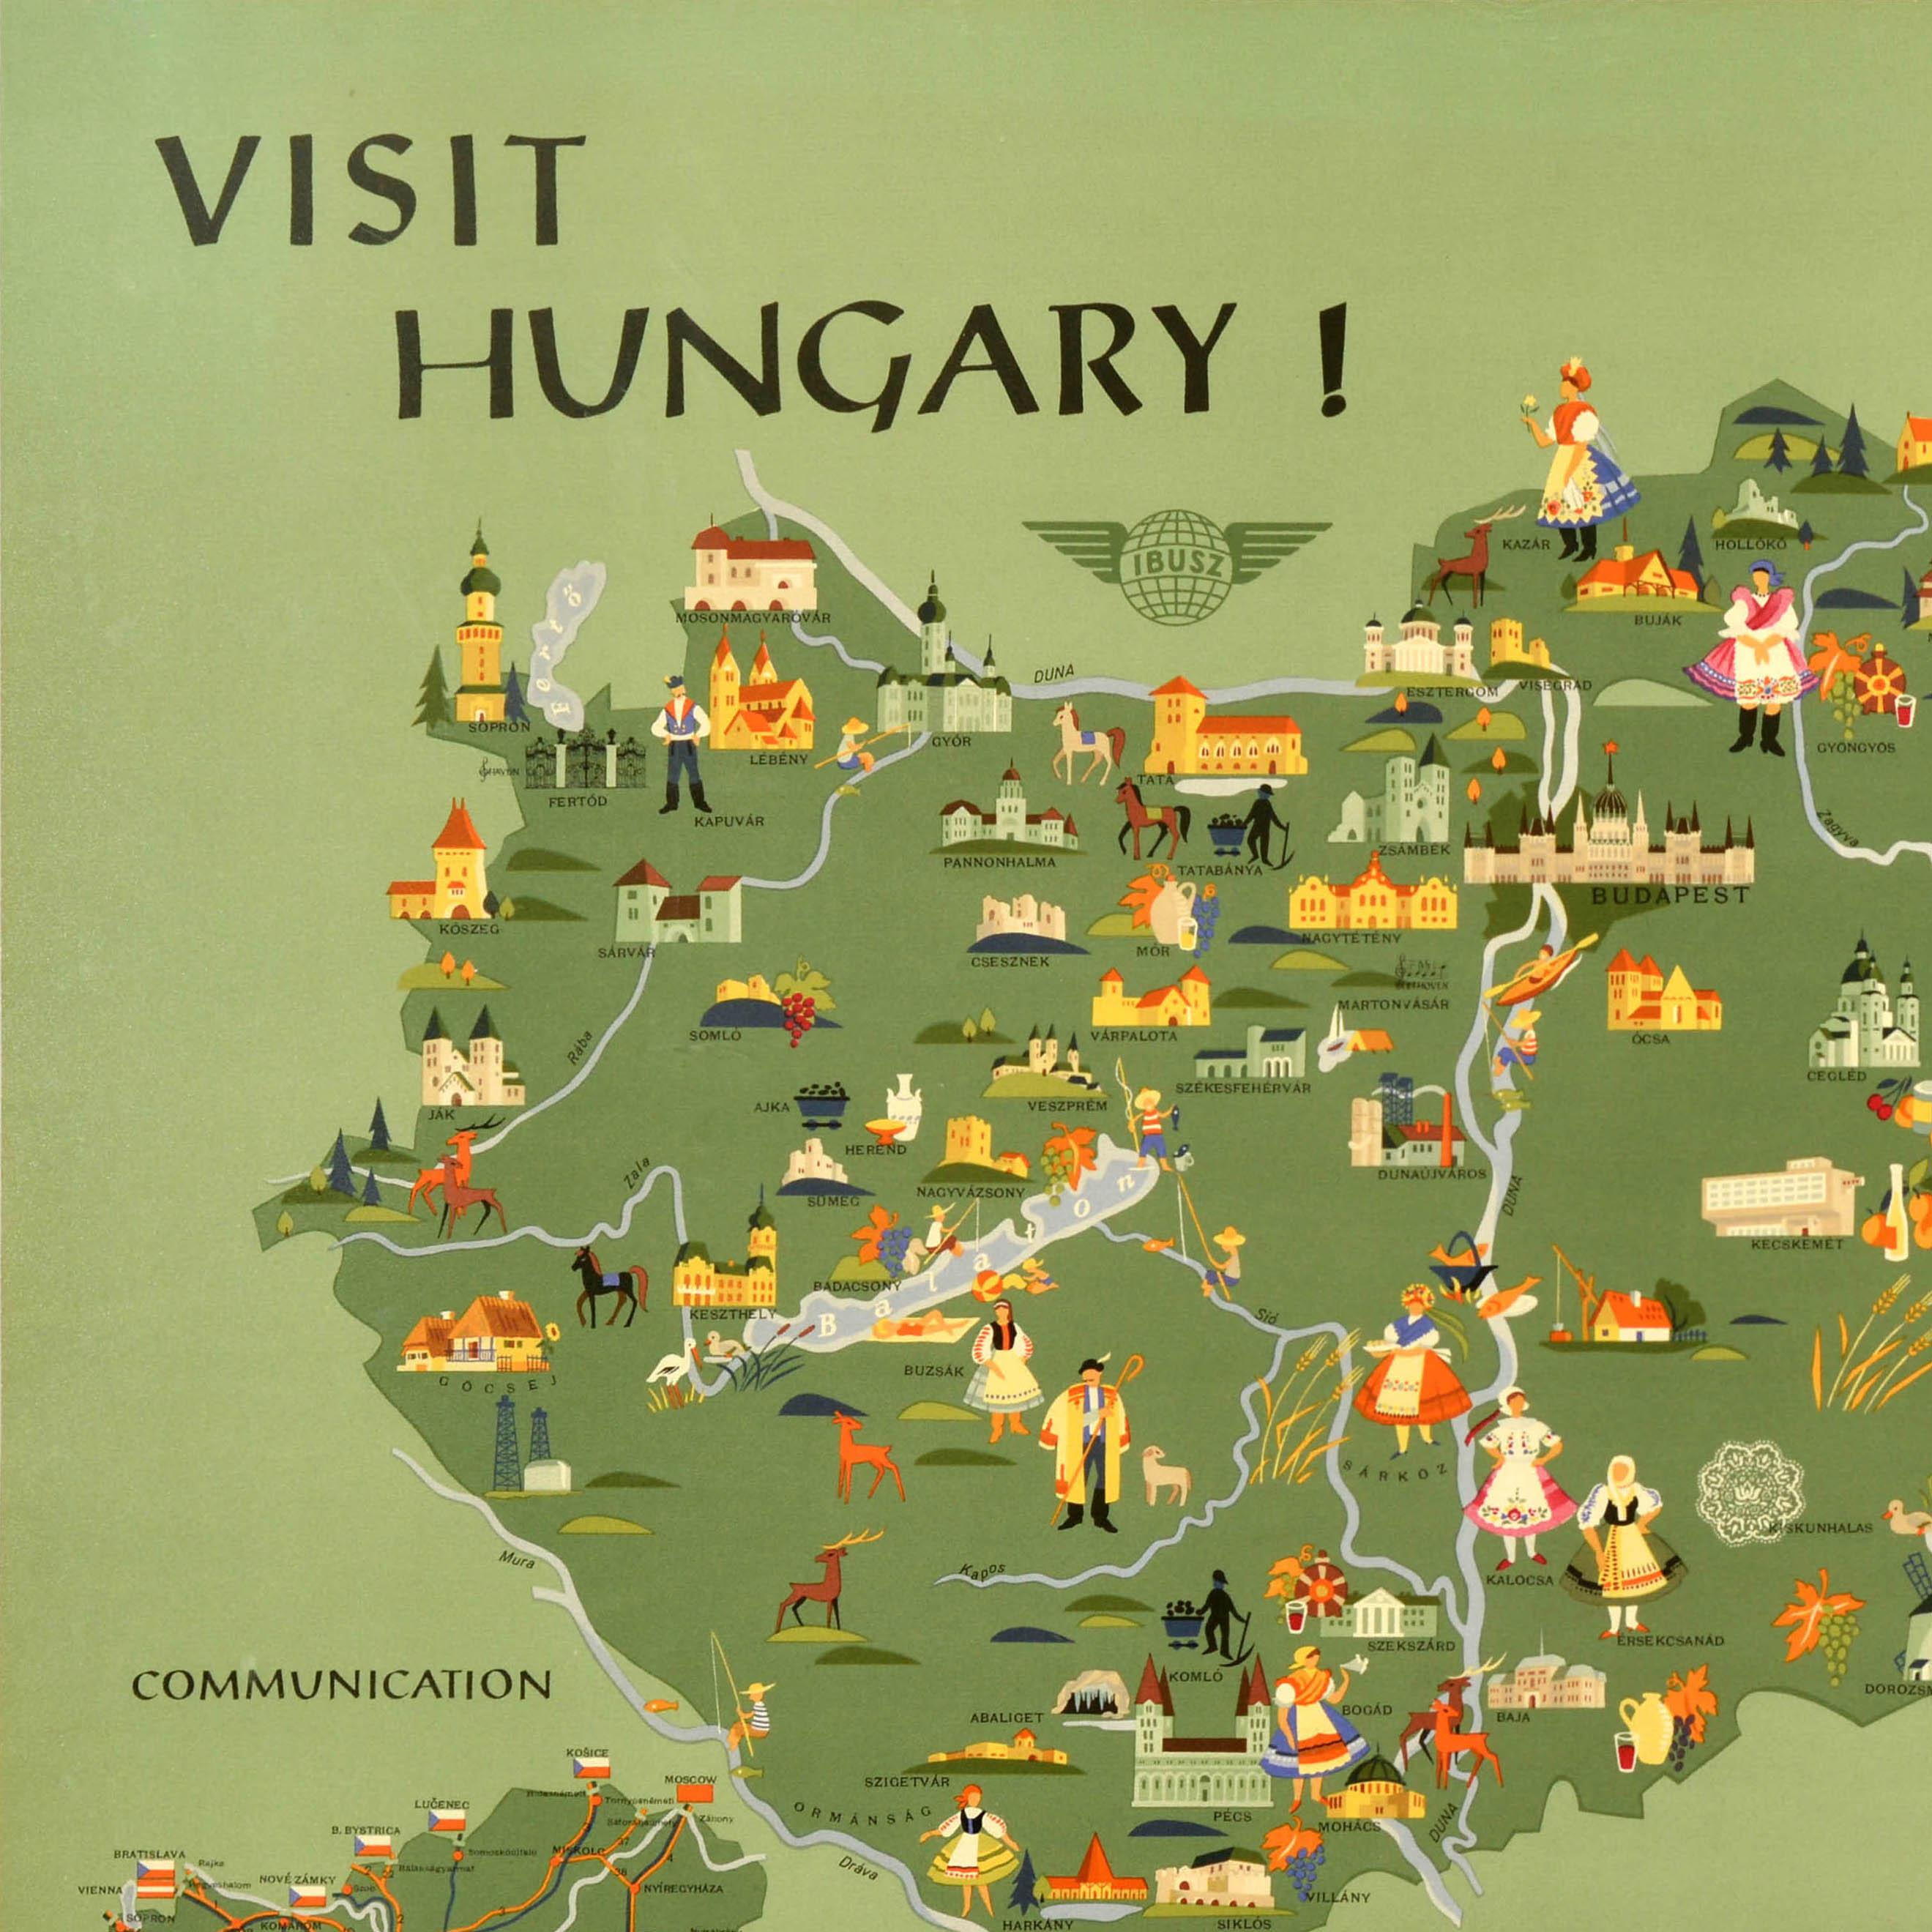 Original vintage travel poster - Visit Hungary! - featuring a pictorial map of the country including colourful illustrations of people in traditional dress, historic castles and other places of interest, lakes and rivers, wine and food, fishing,